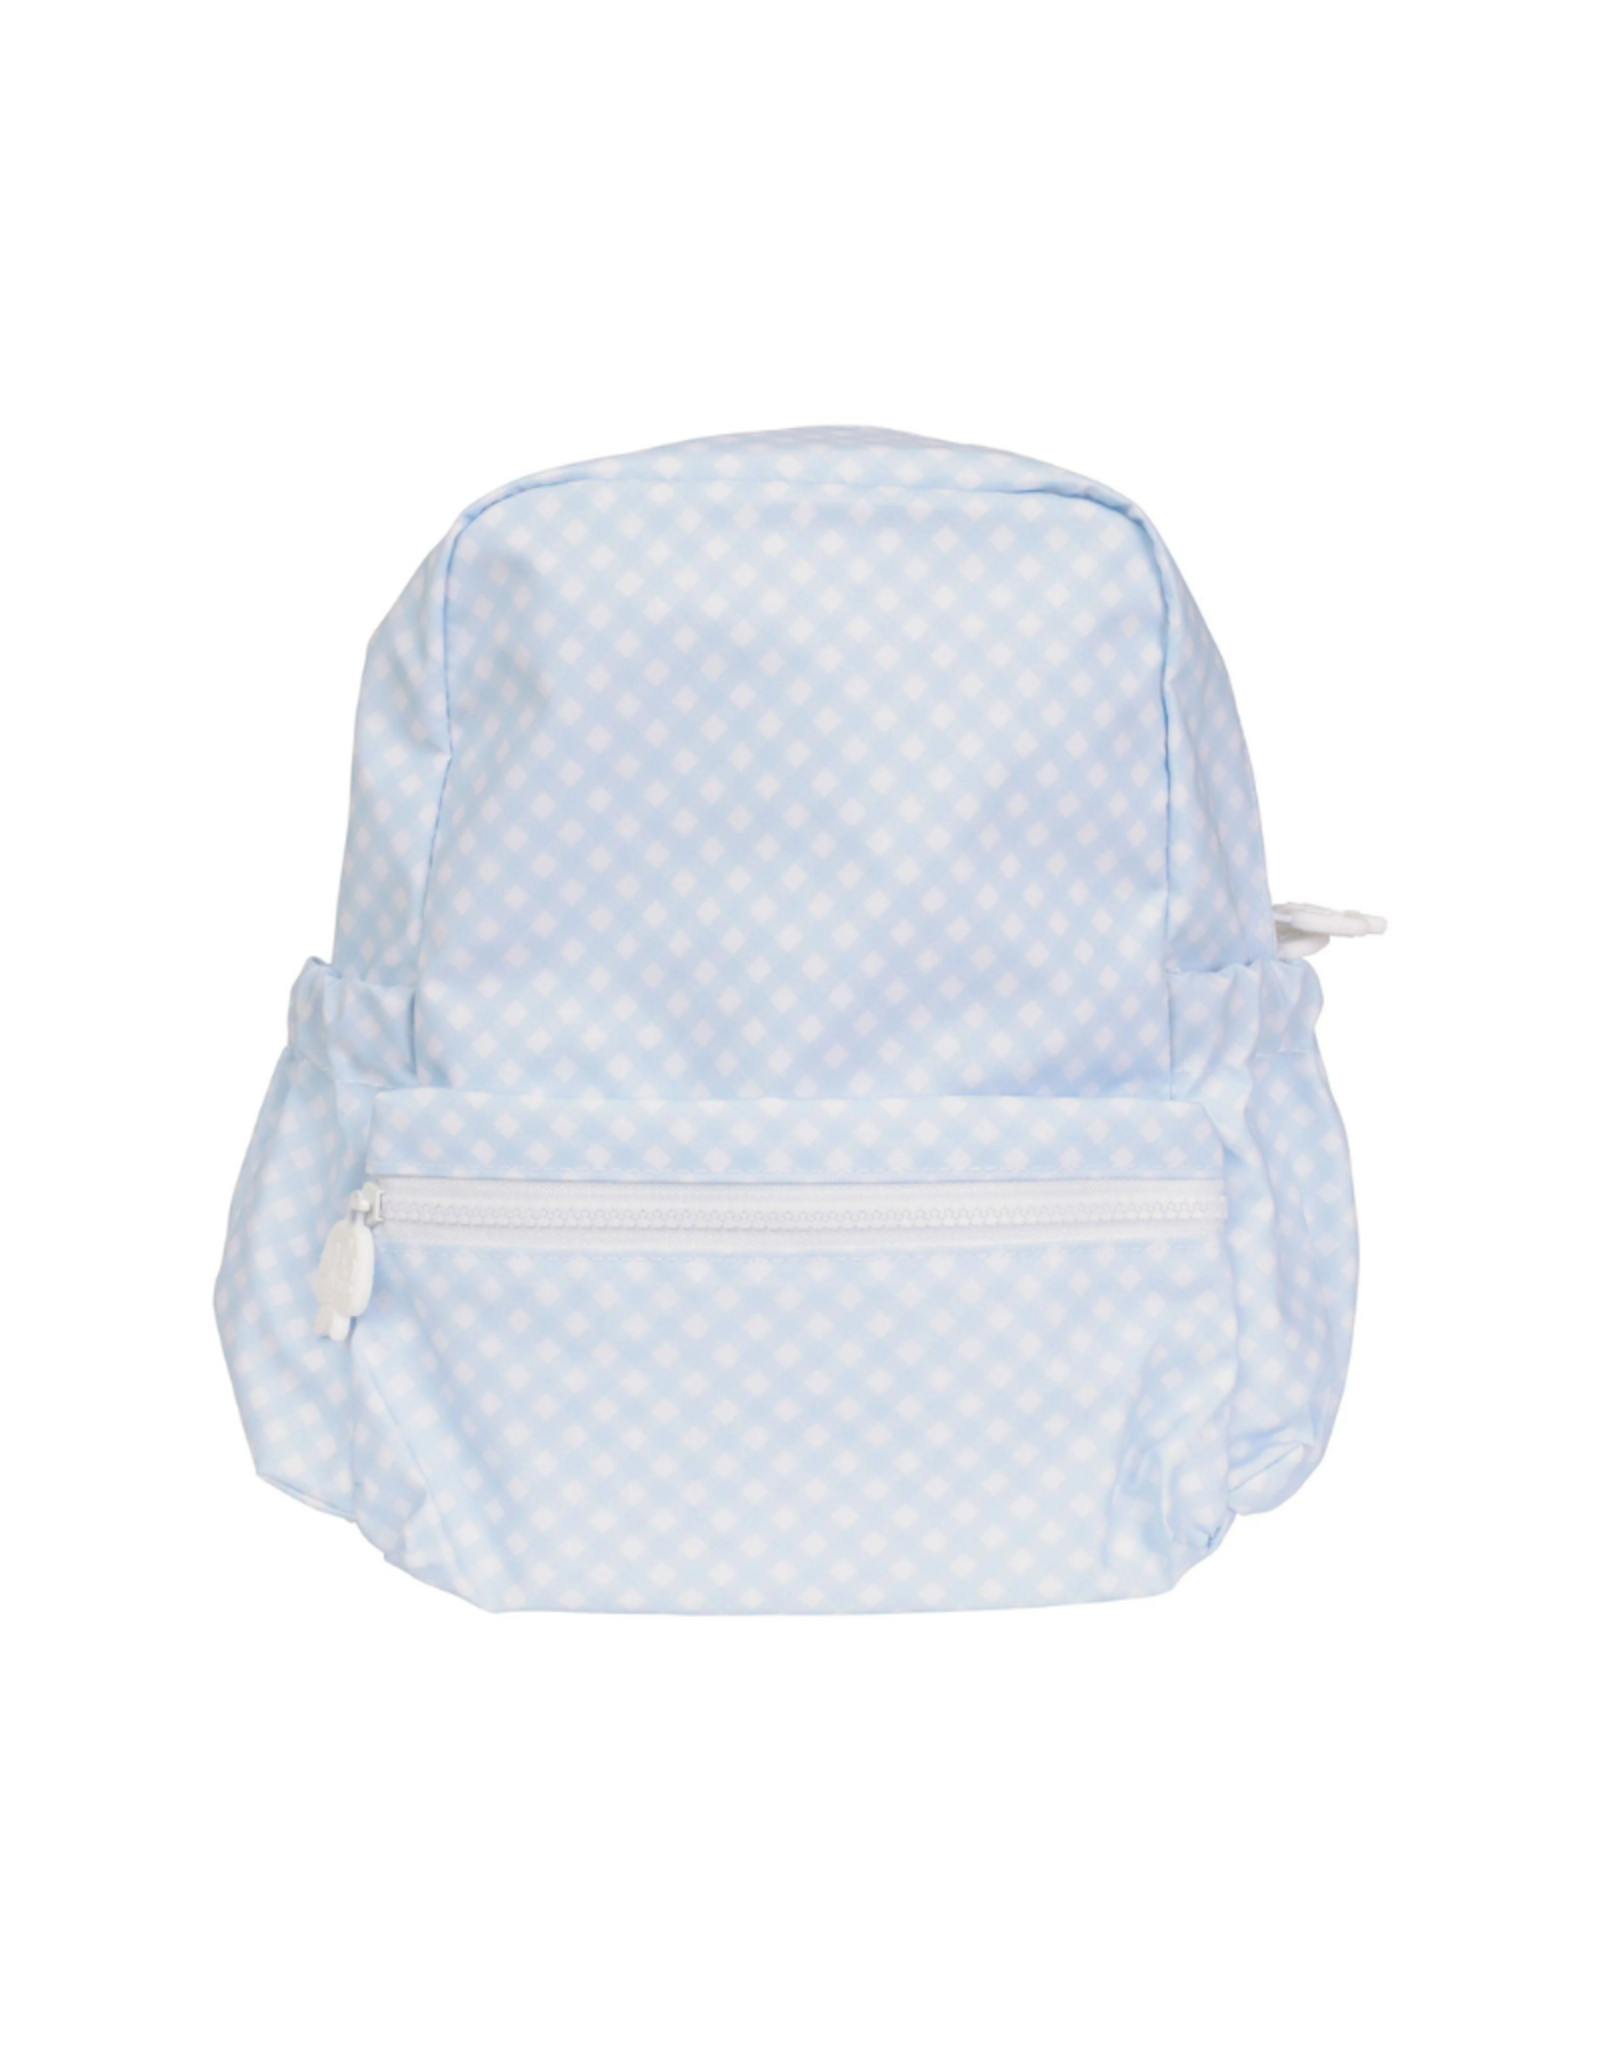 Apple of My Isla The Backpack Small, Blue Gingham